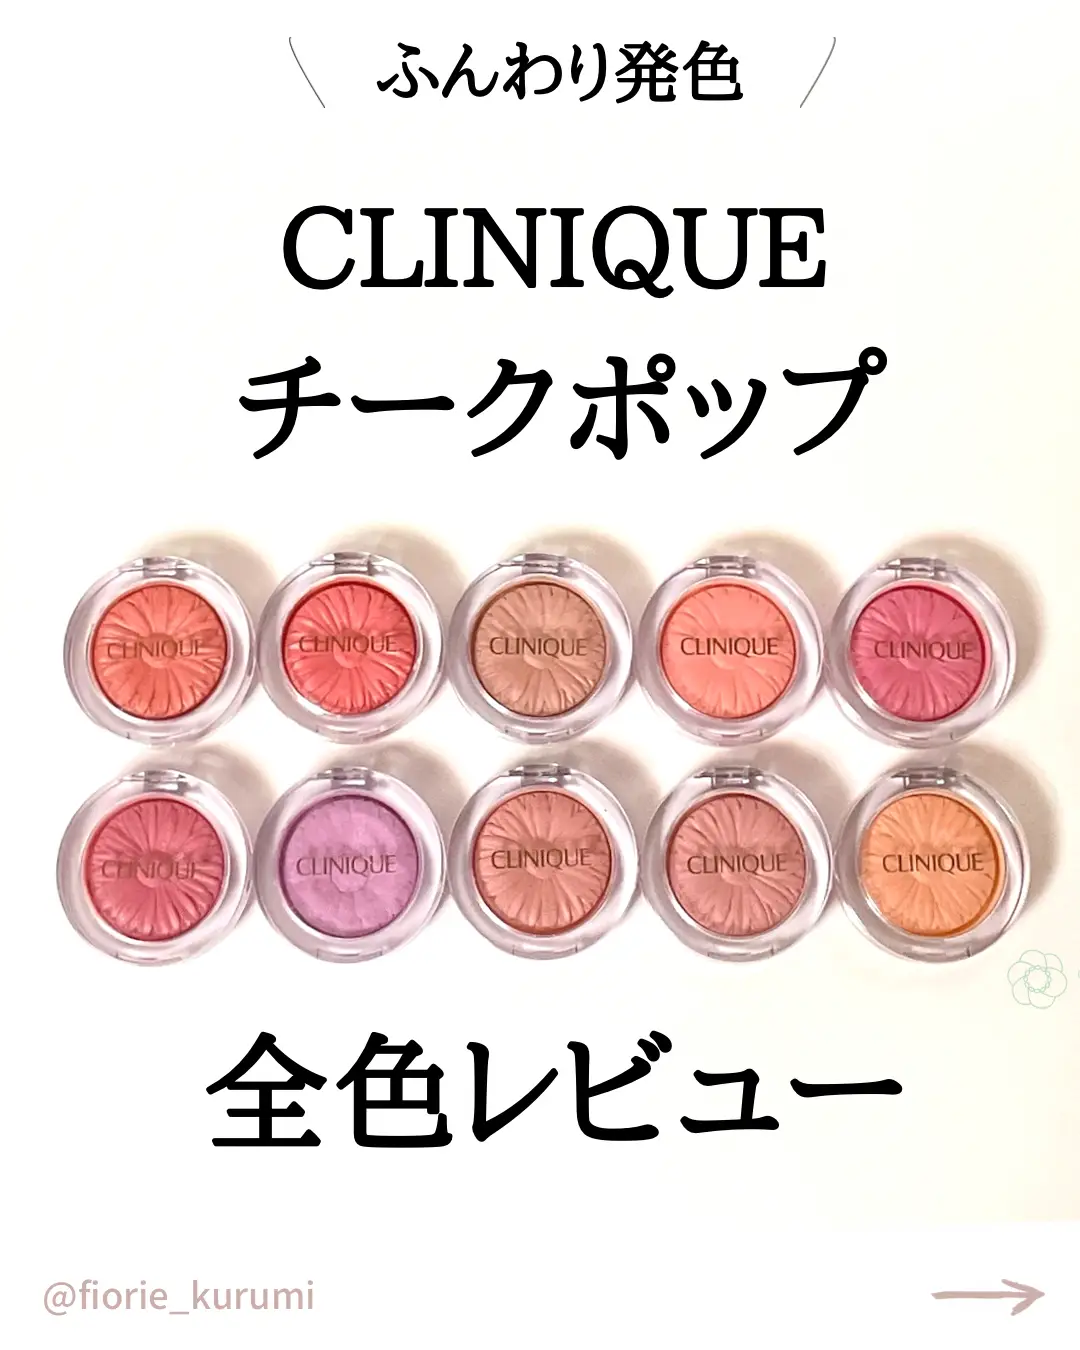 Clinique Cheek Pop by Personal Color🌸 | Gallery posted by ［柏